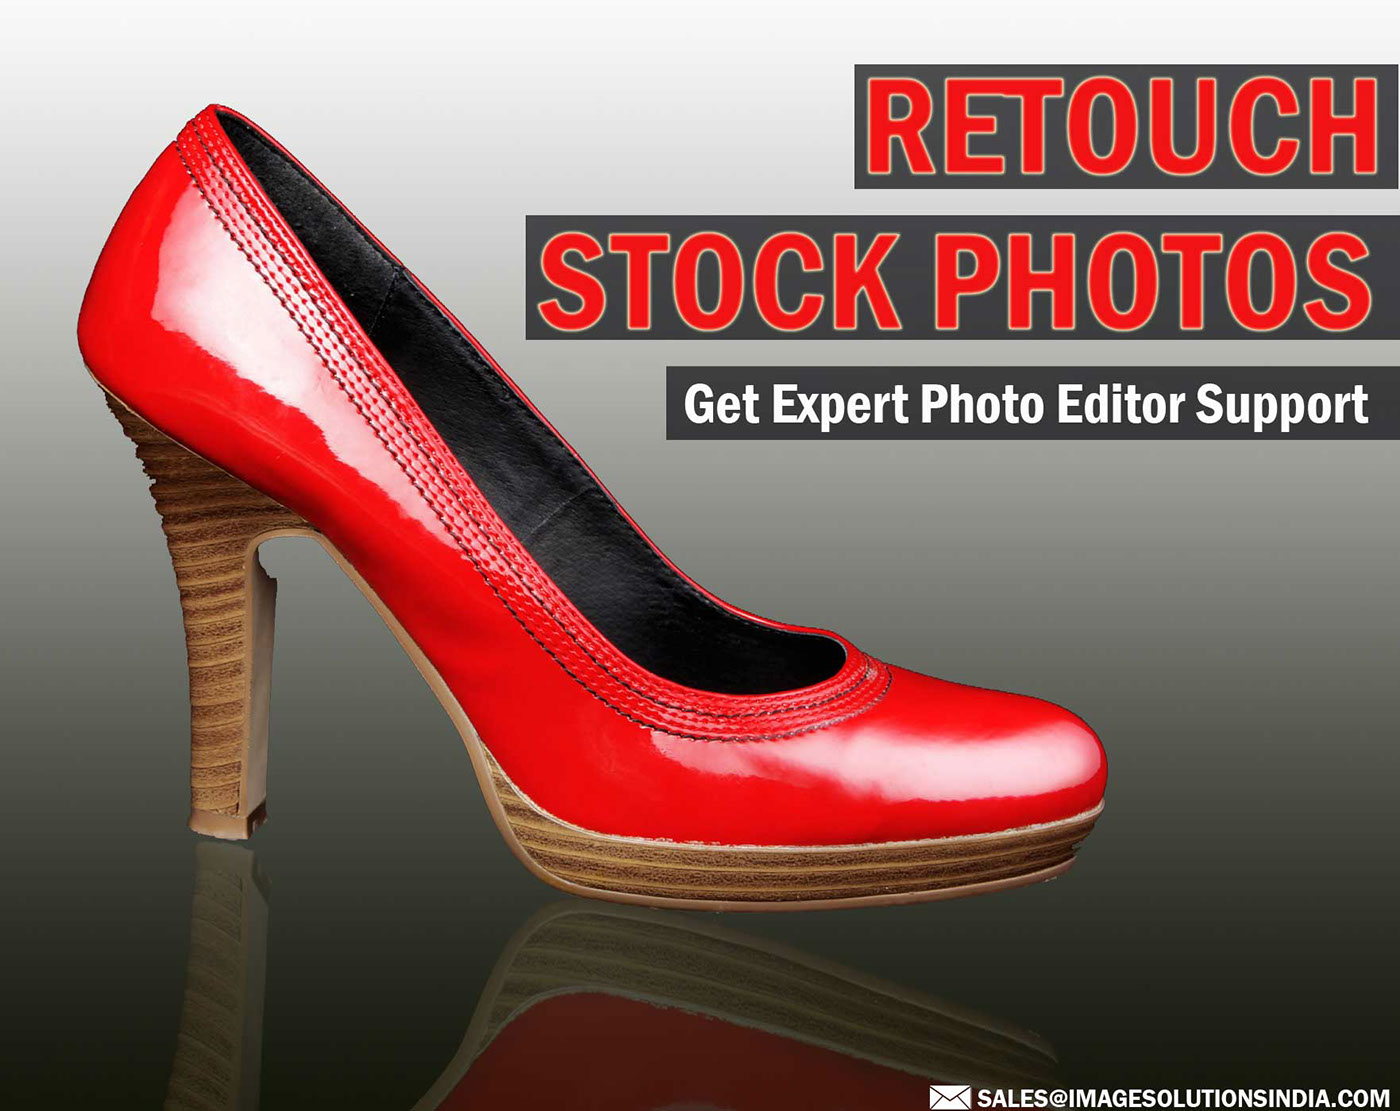 Stock Photo Editing services retouch stock images stock image Editing Services retouch stock photos stock Image Editing